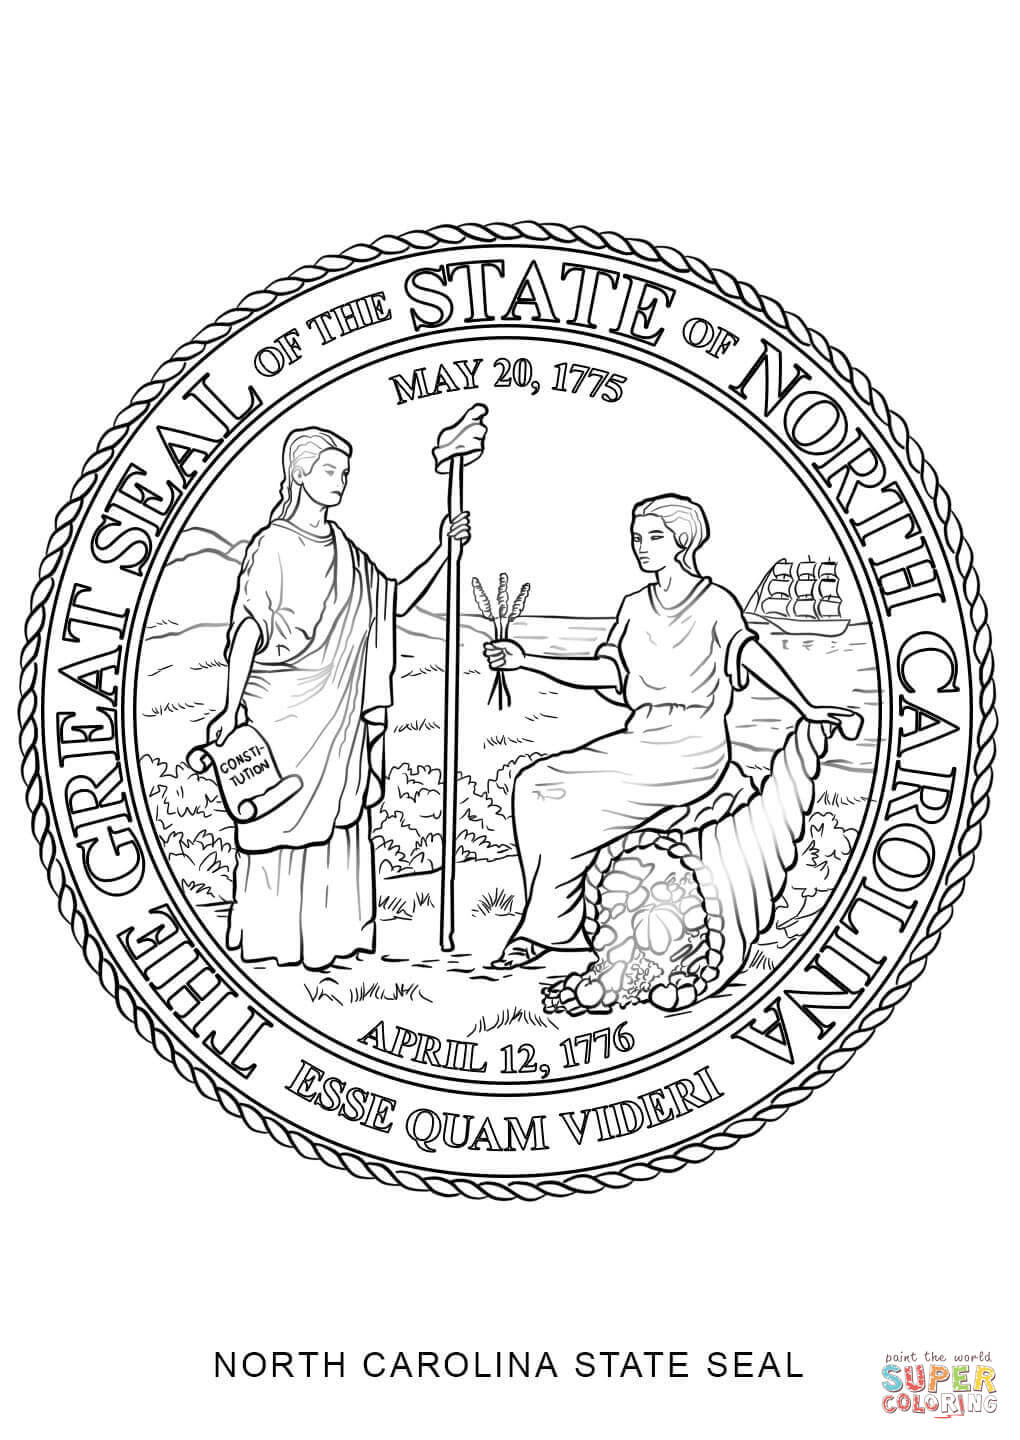 Download North Carolina State Seal coloring page | Free Printable Coloring Pages